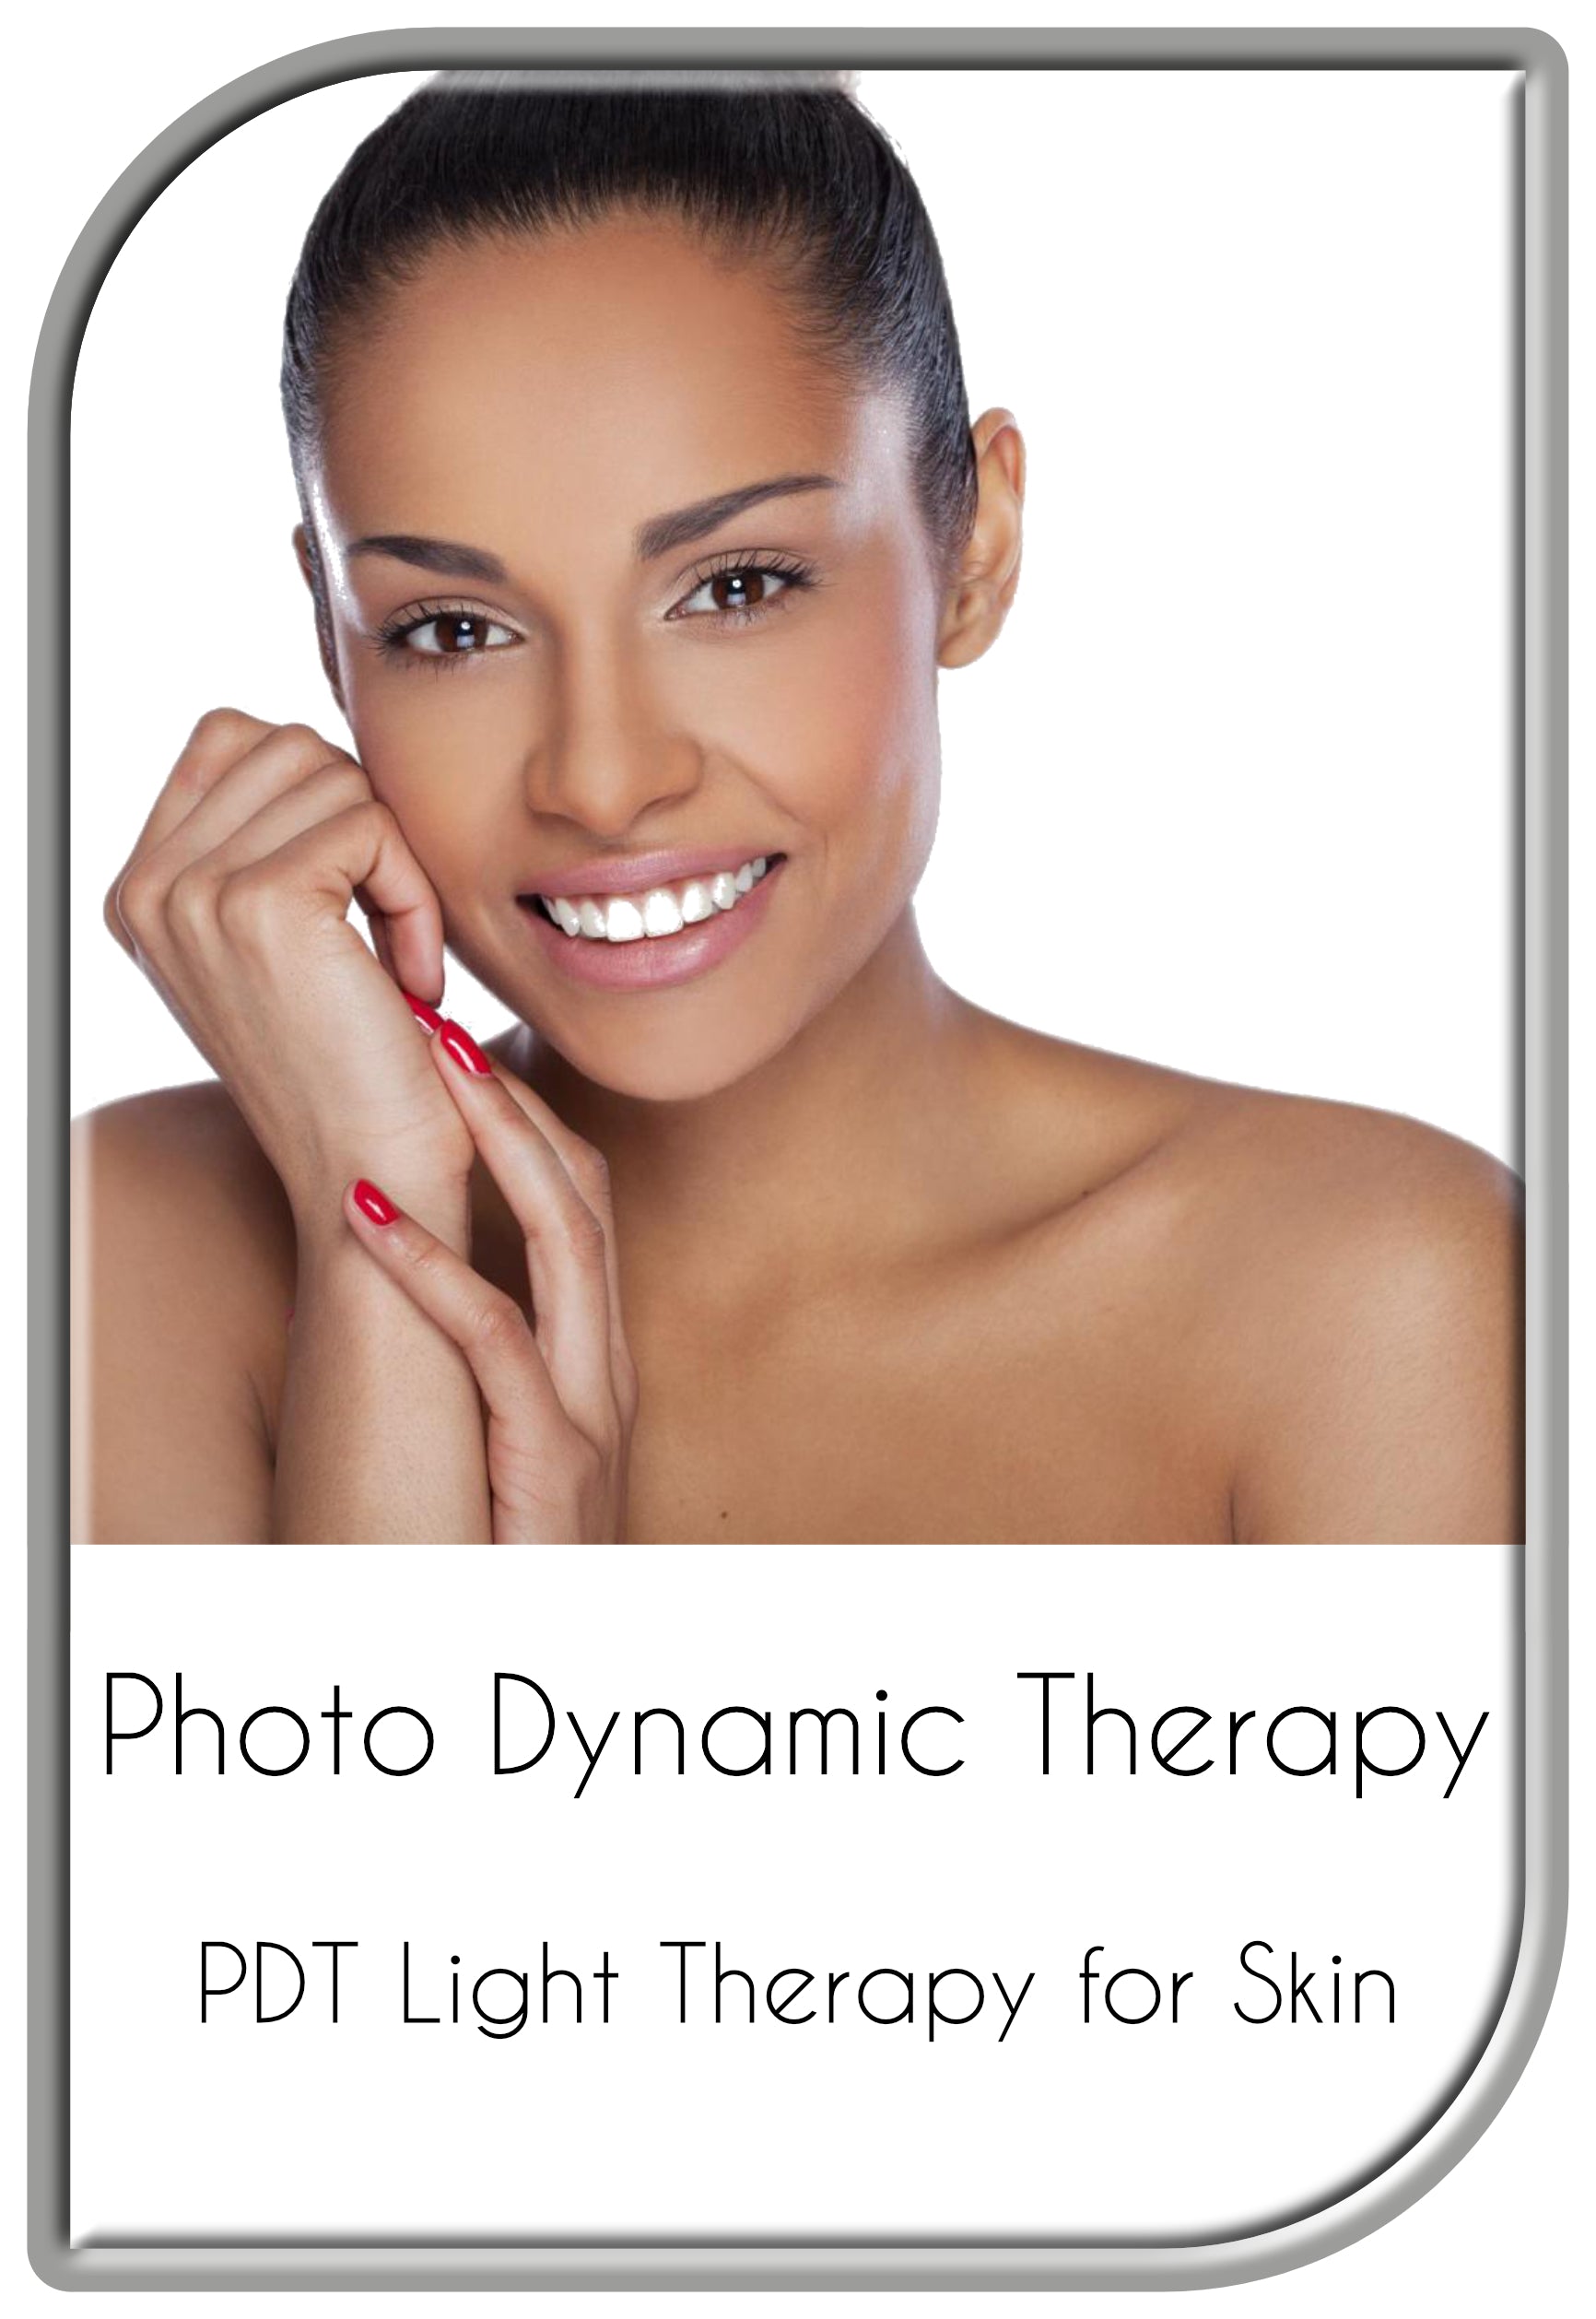 Photo Dynamic Therapy (PDT Light Therapy)